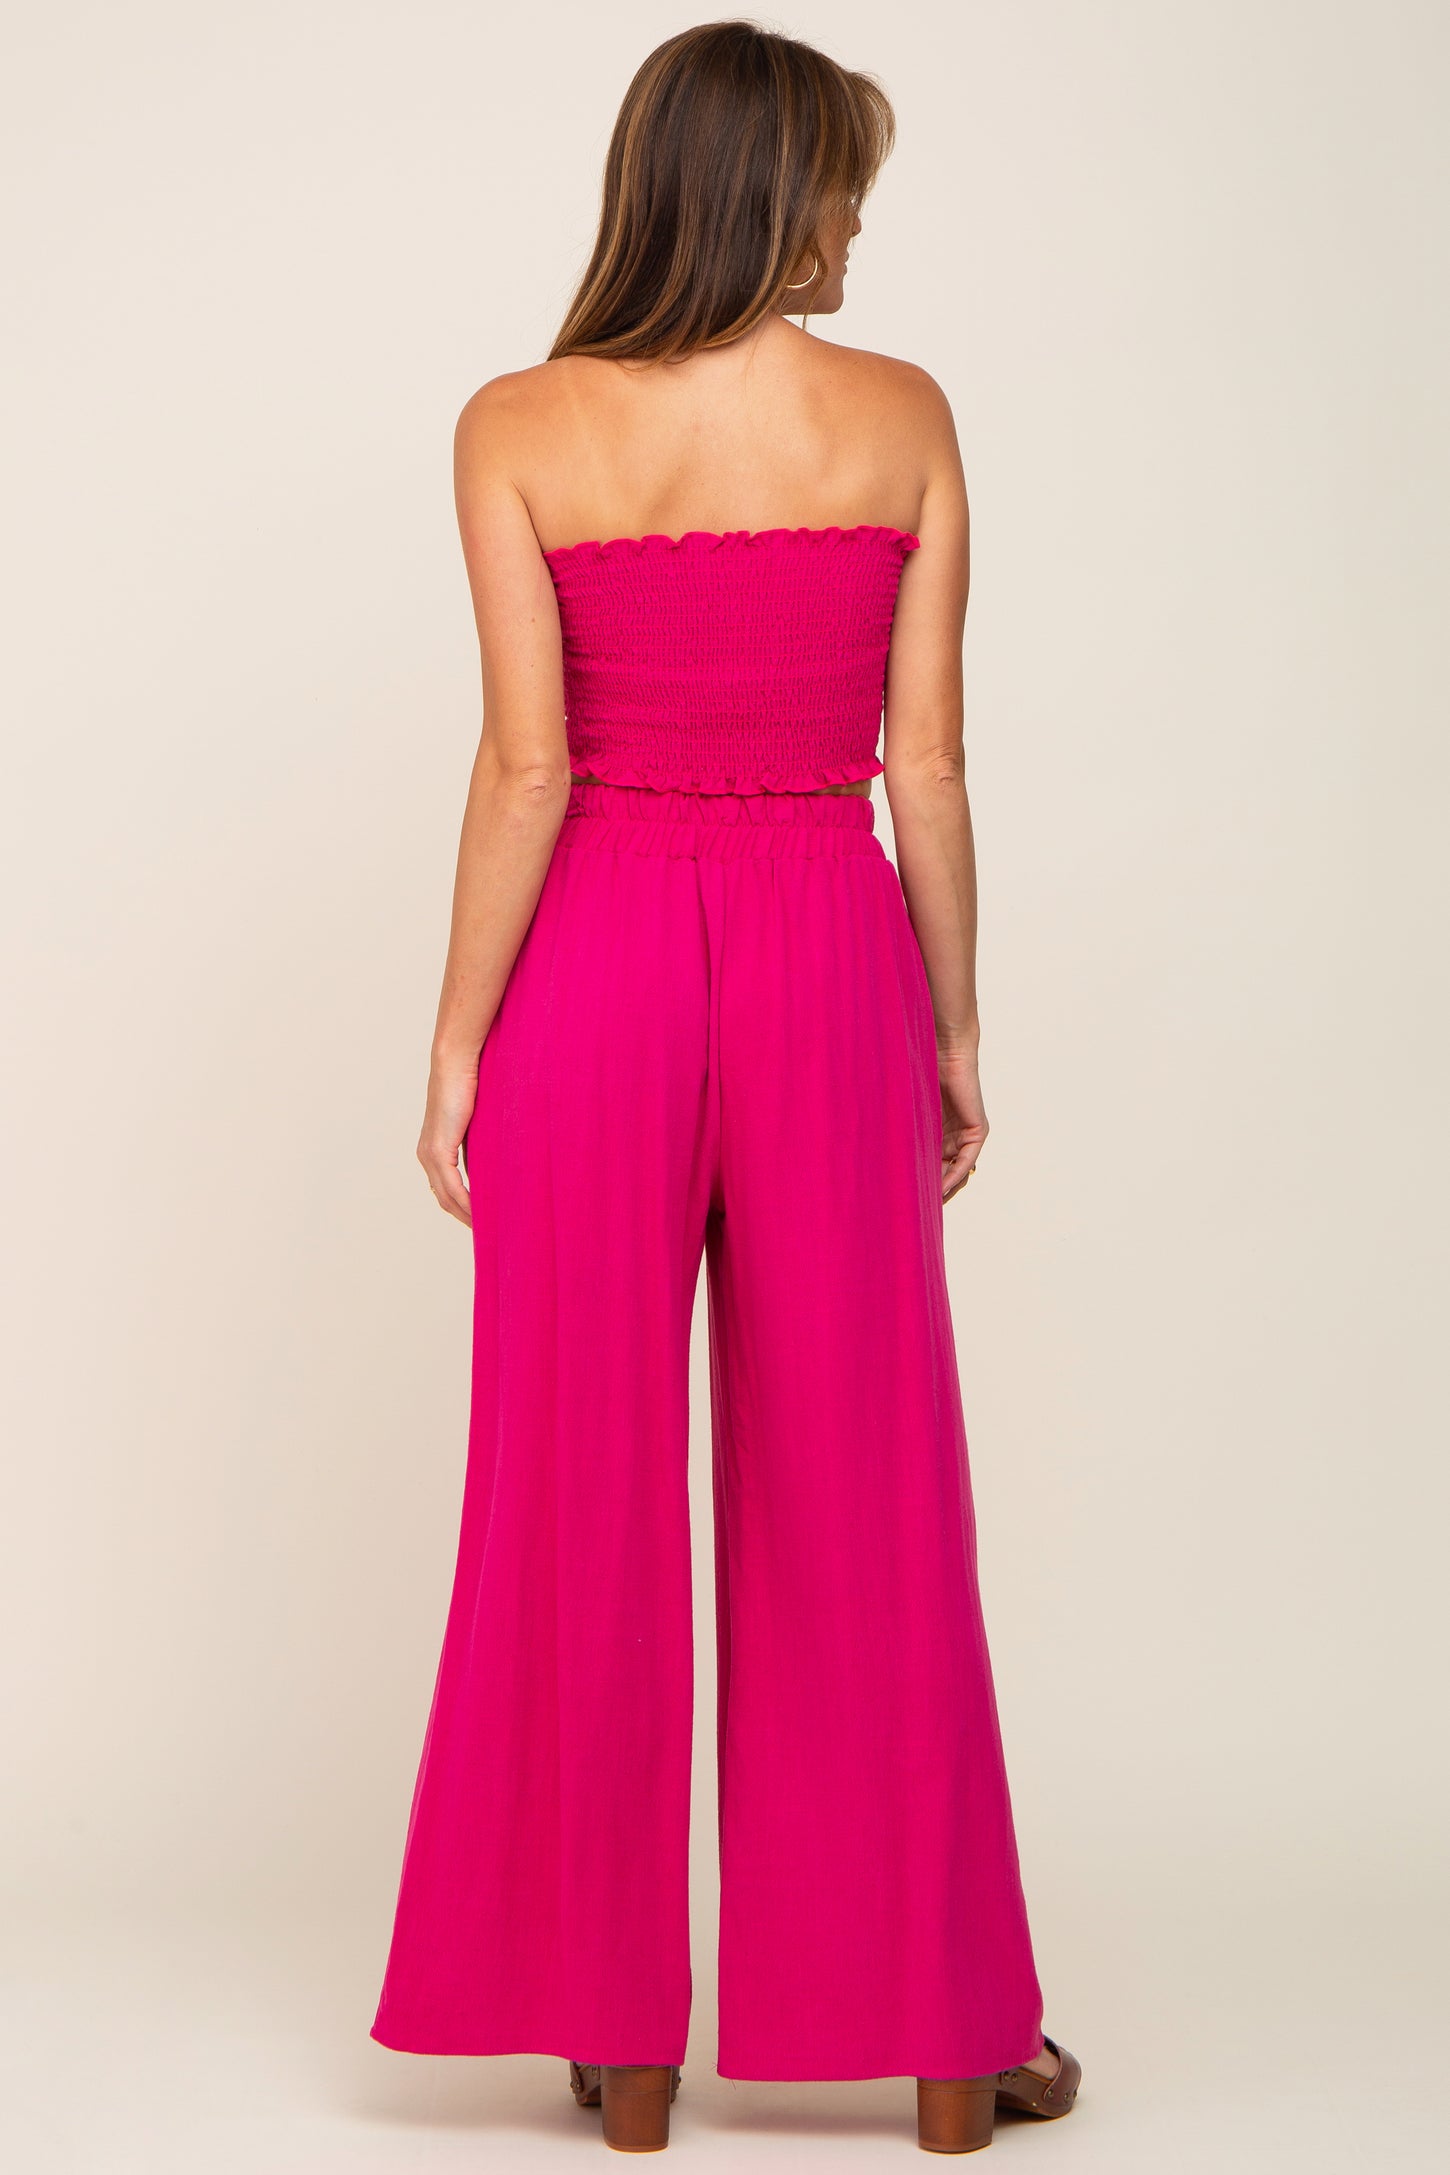 Fuchsia Front Tie Crop Top and Pant Set